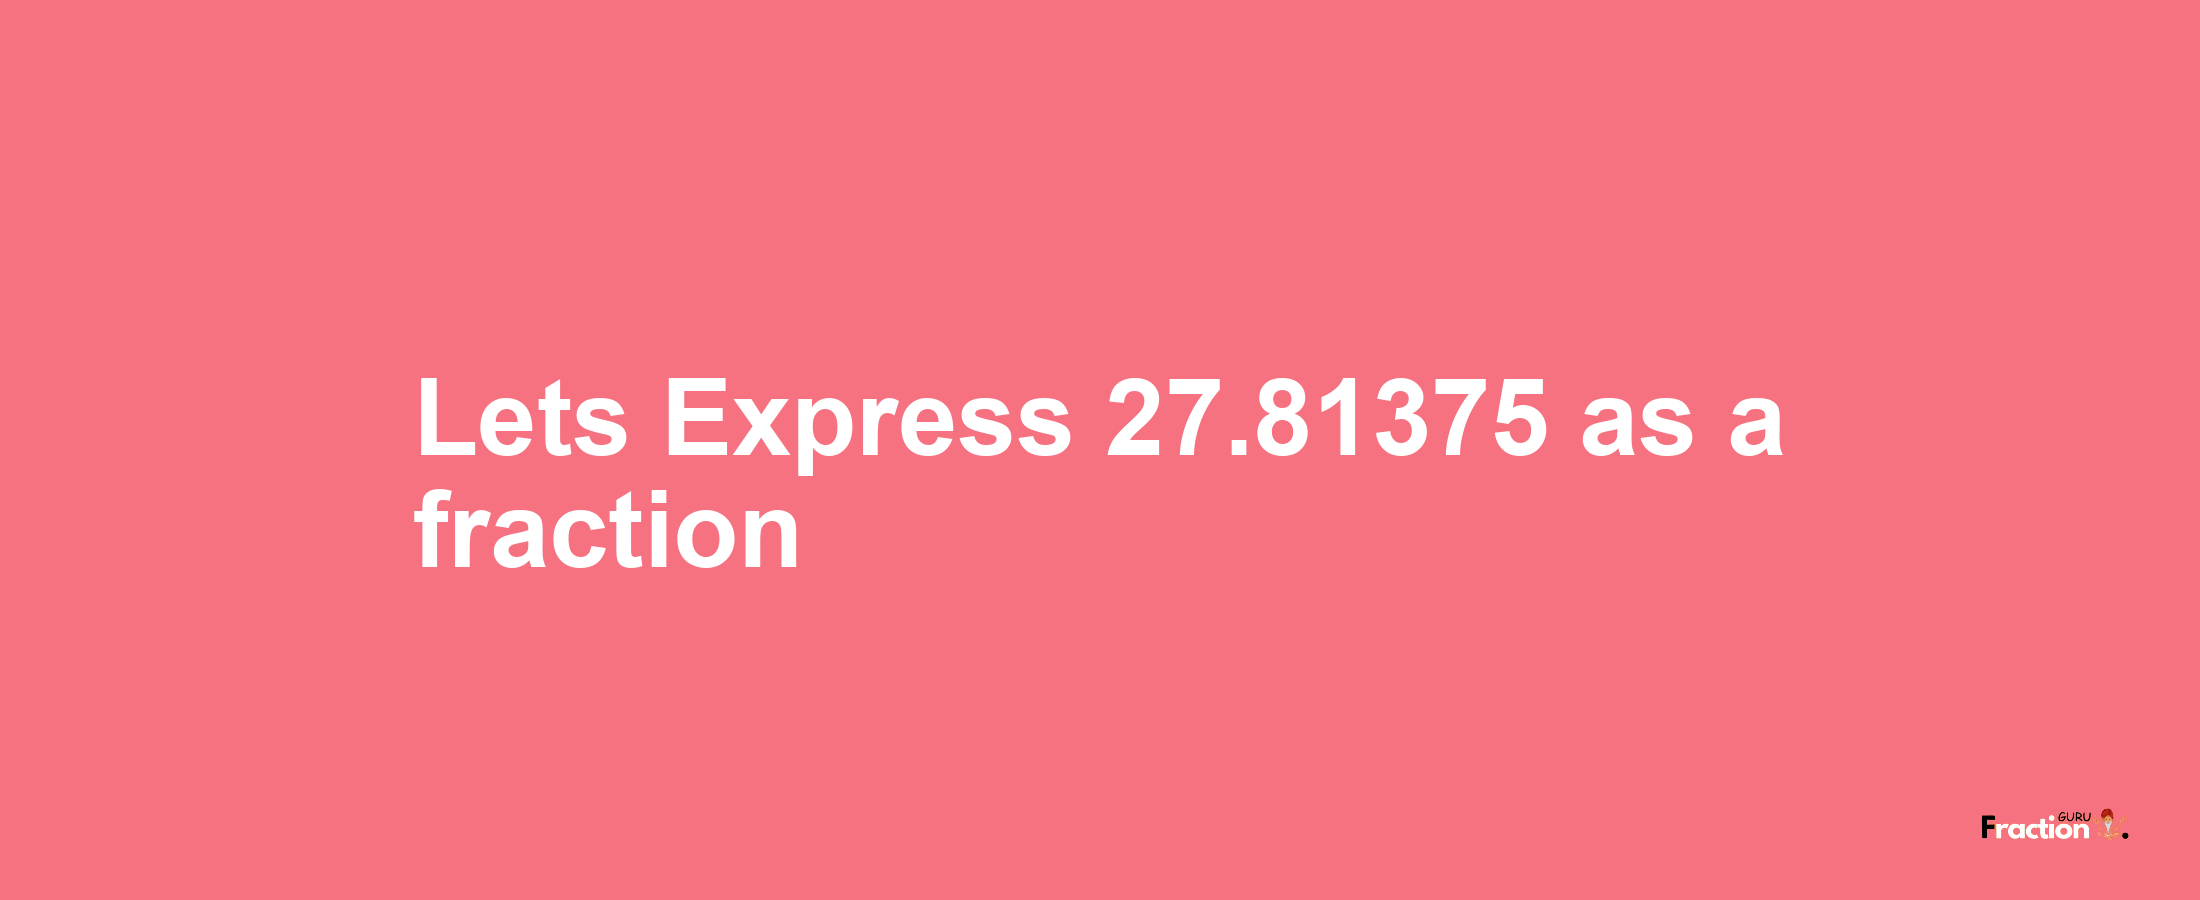 Lets Express 27.81375 as afraction